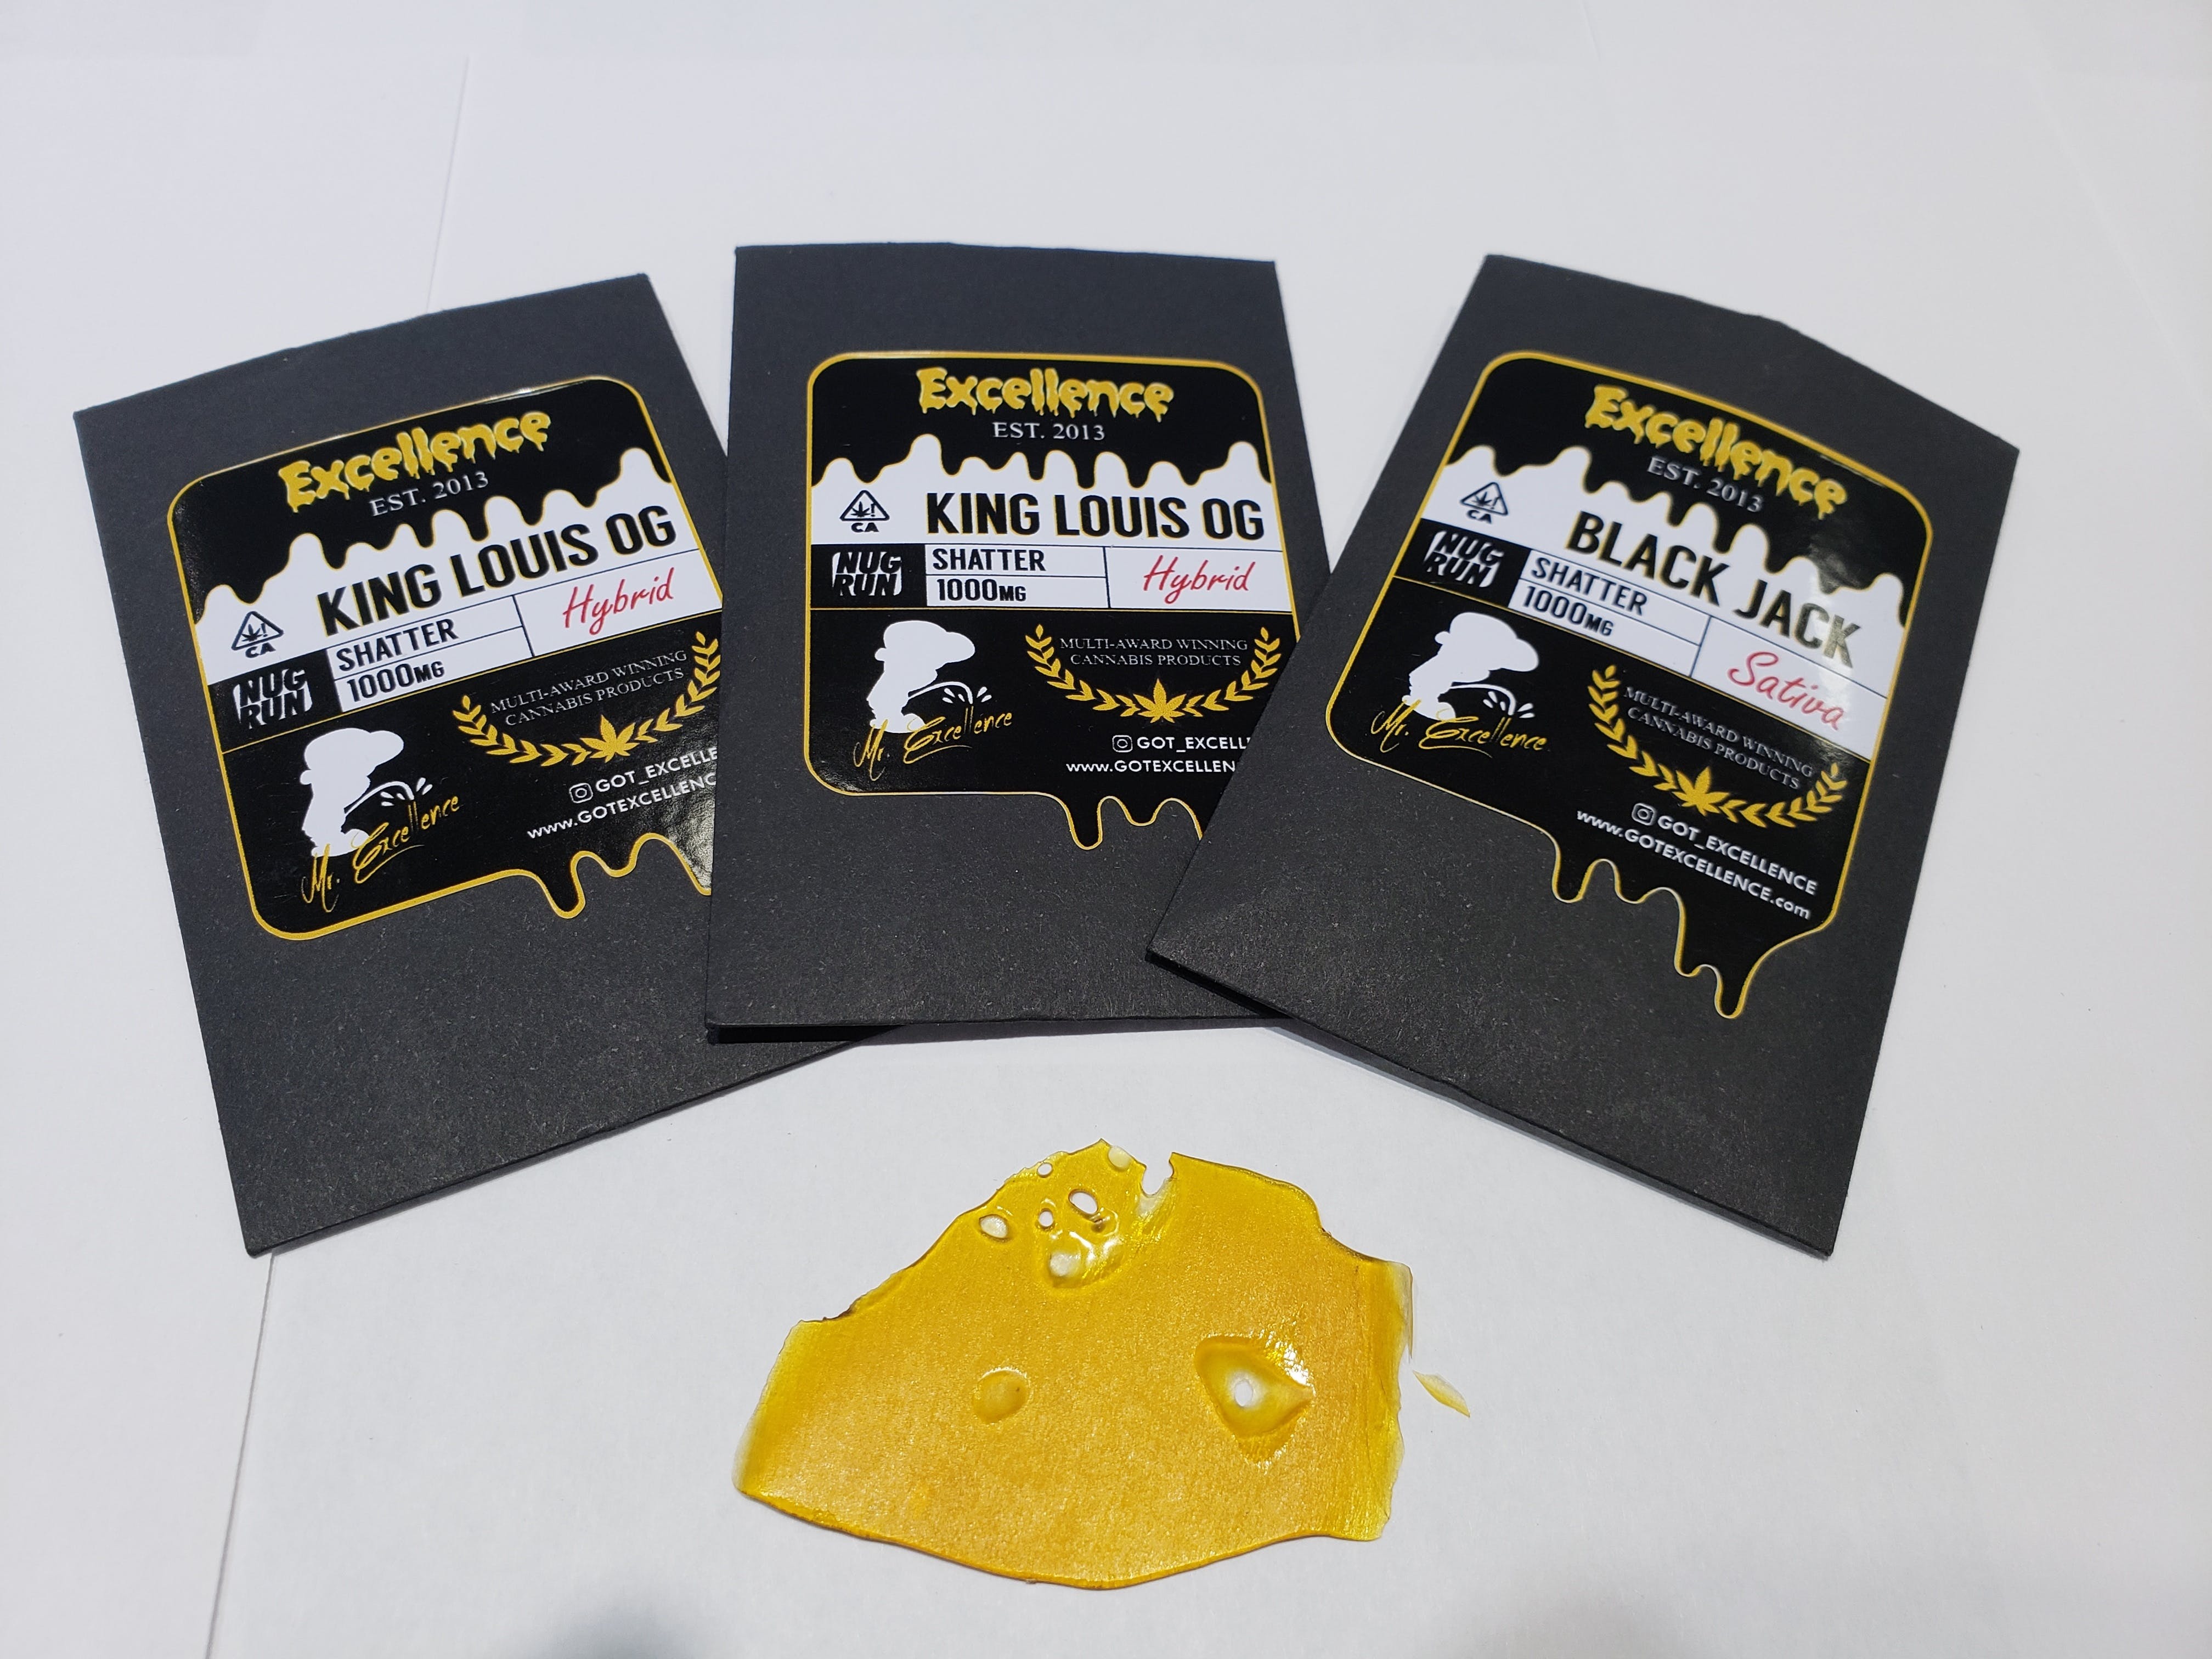 marijuana-dispensaries-fcc-florence-canna-clinic-in-los-angeles-pissing-excellence-nug-run-shatter-1g